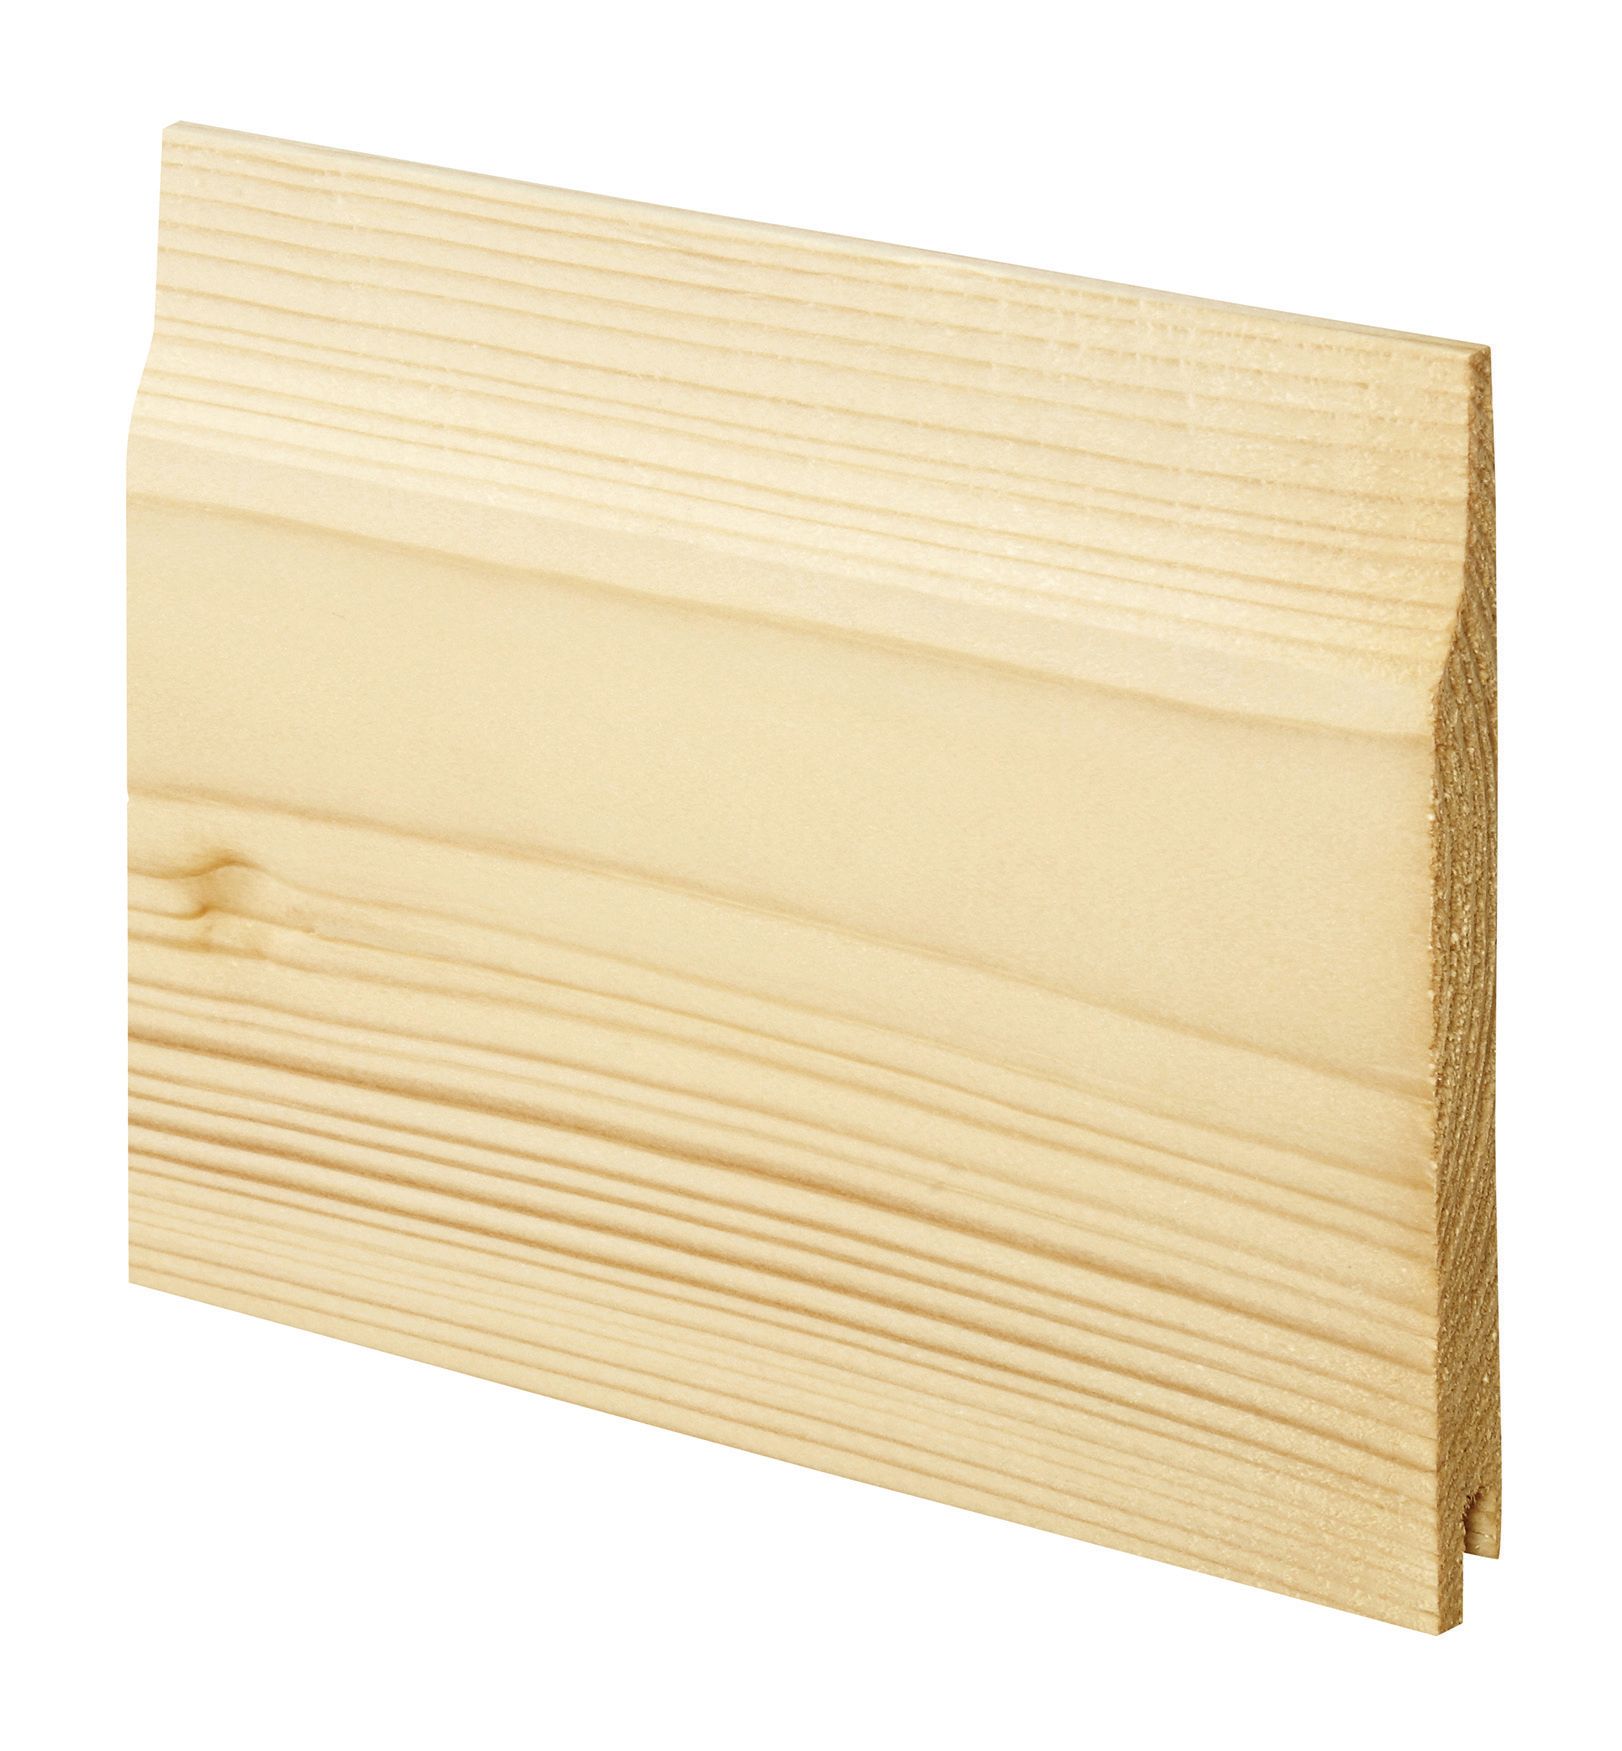 Image of Wickes Softwood Shiplap Cladding 12mm x 121mm x 1800 mm Single